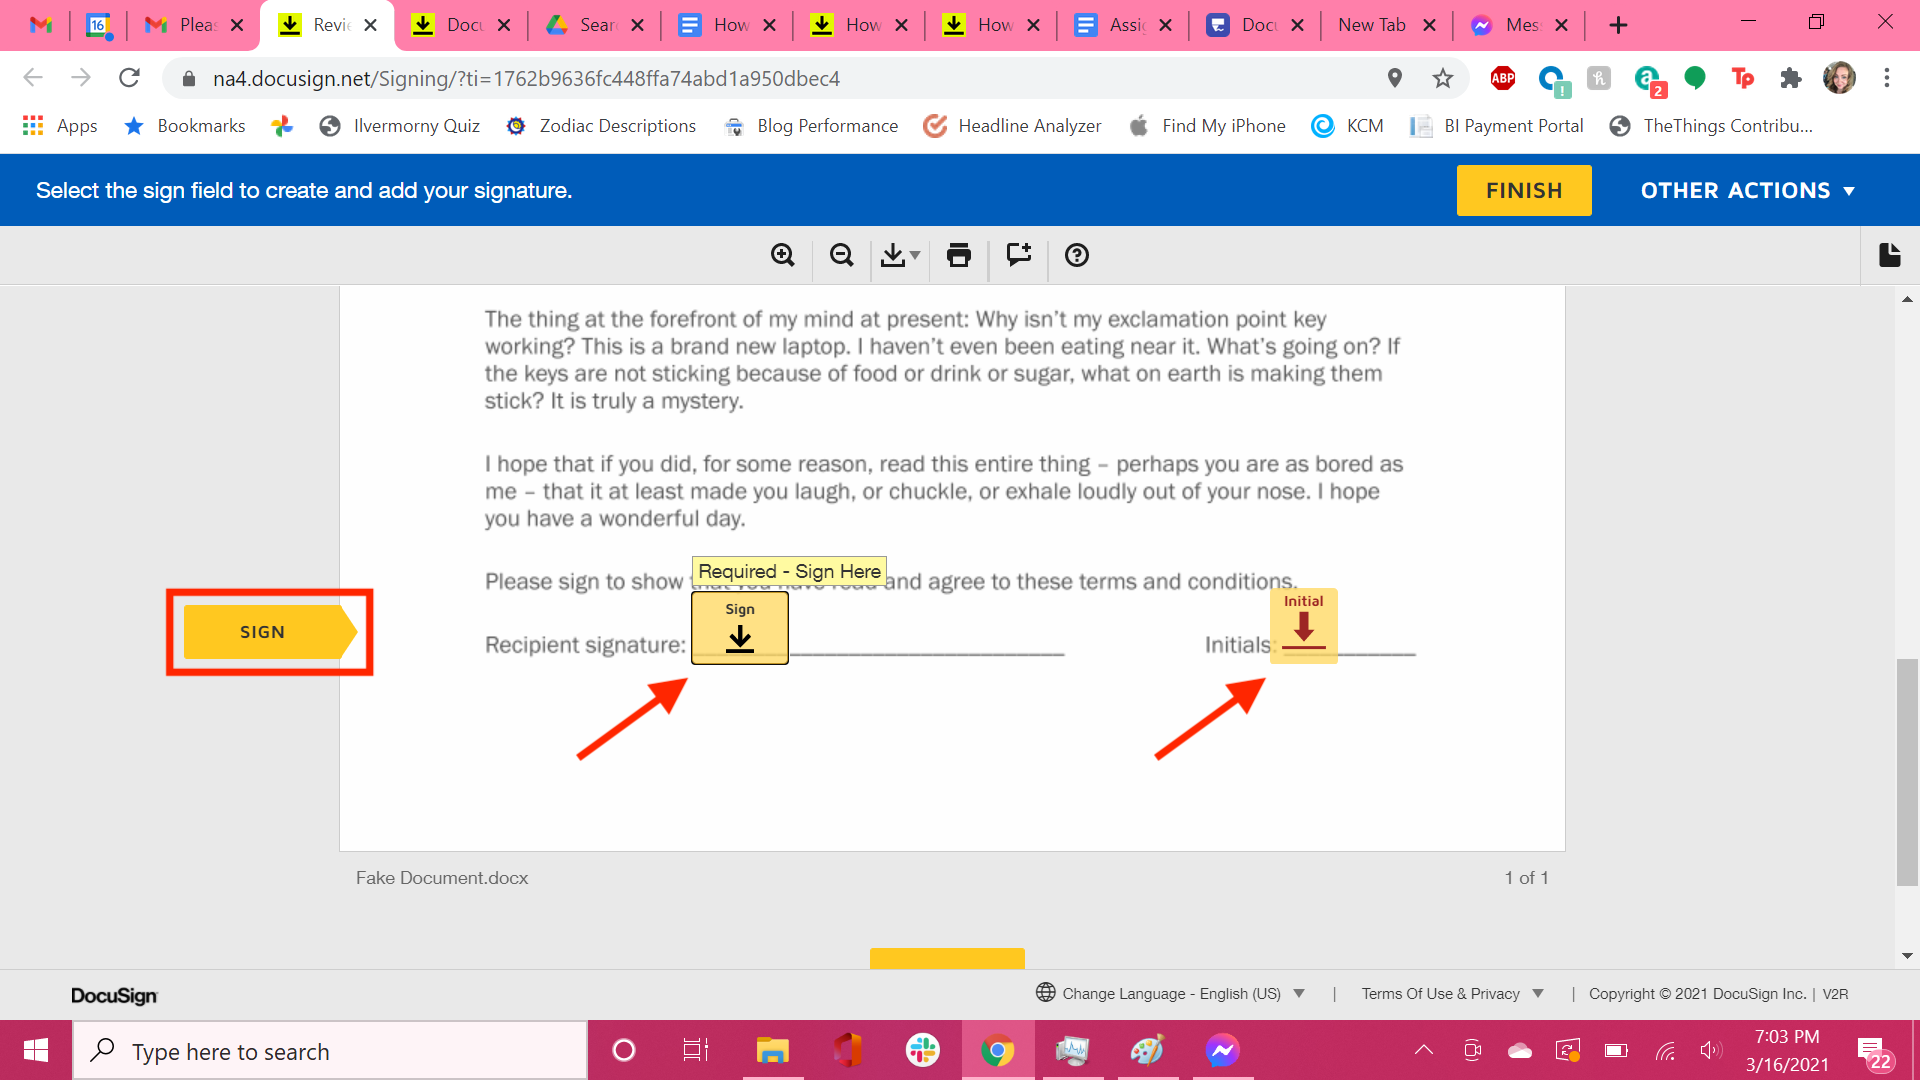 How to use DocuSign to send or add your digital signature to important